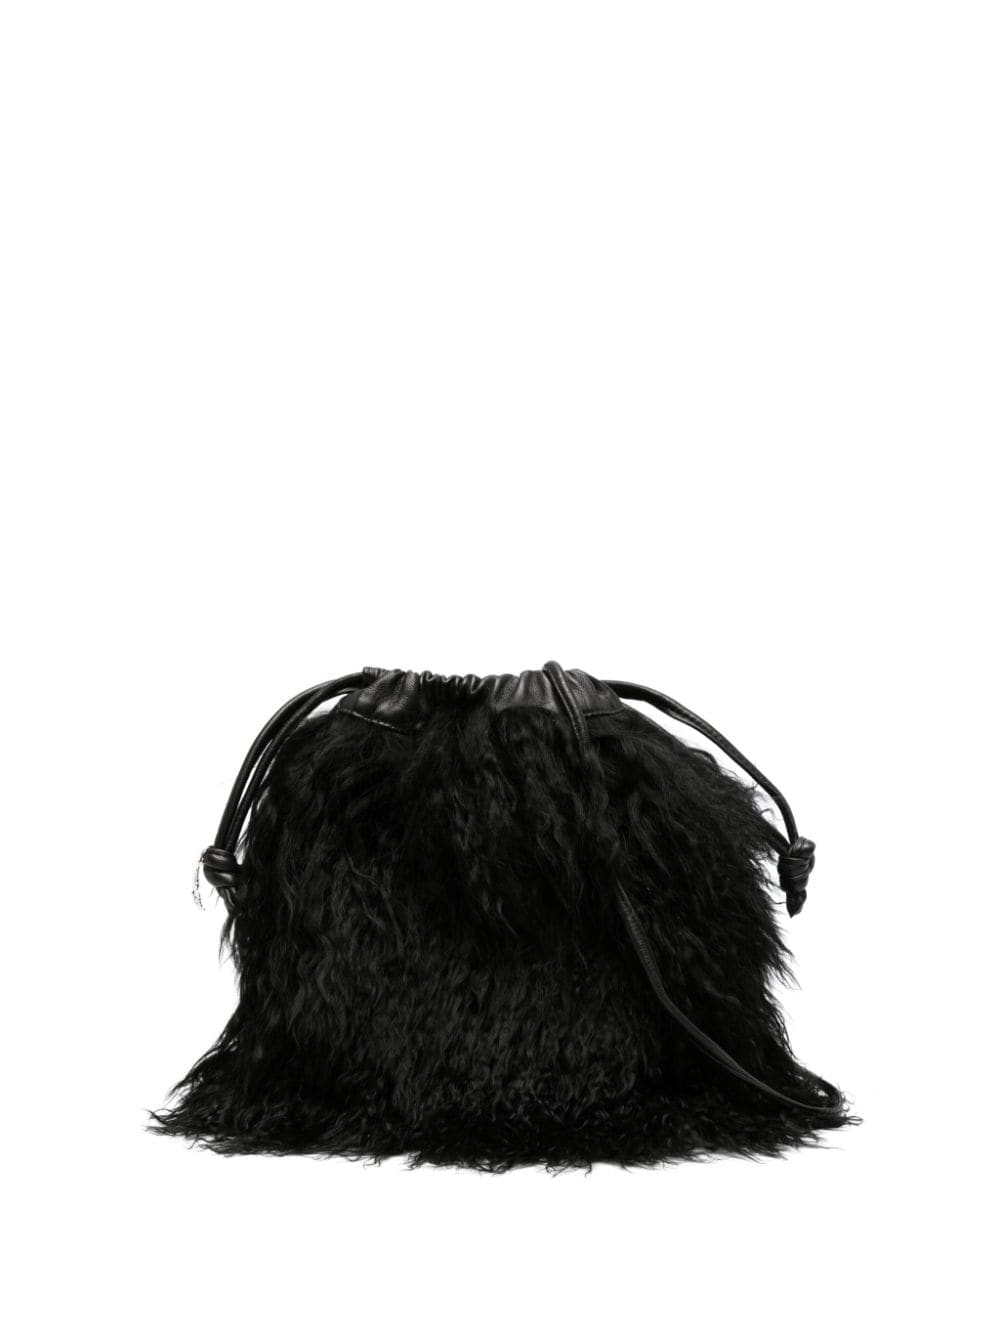 Zadig&Voltaire Rock To Go Frenzy shearling bucket bag - Black